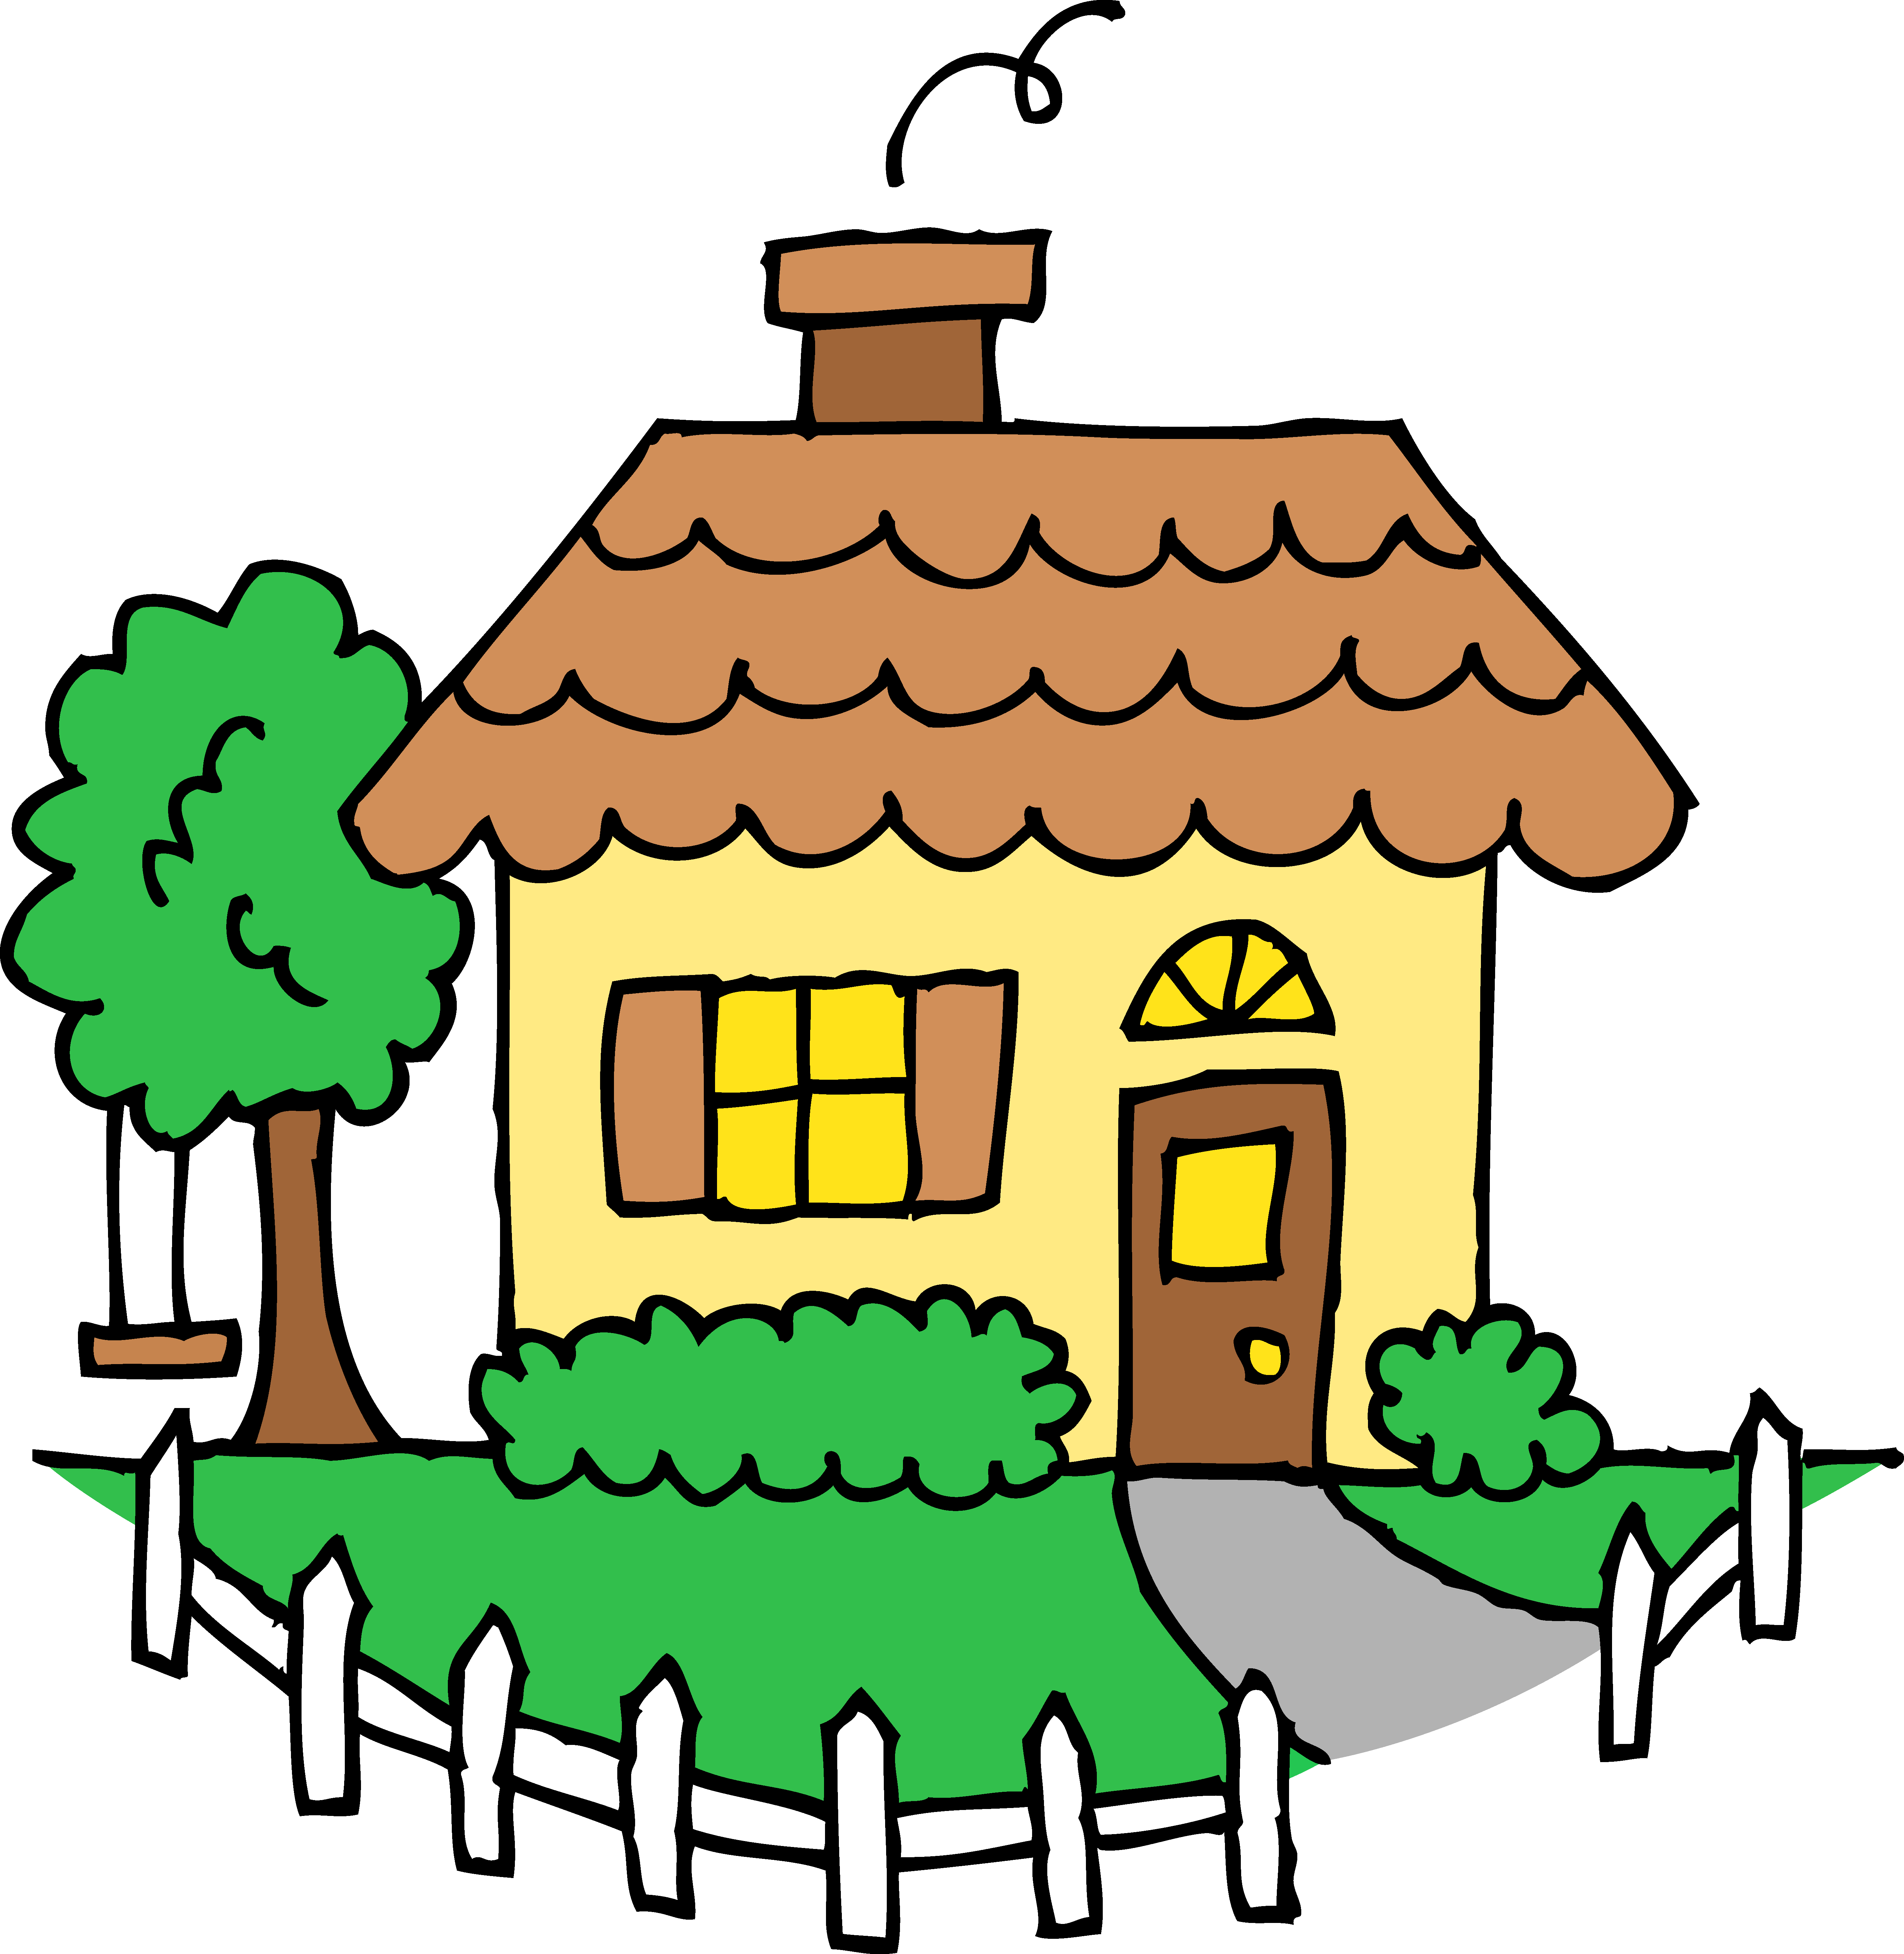 Clipart Homes